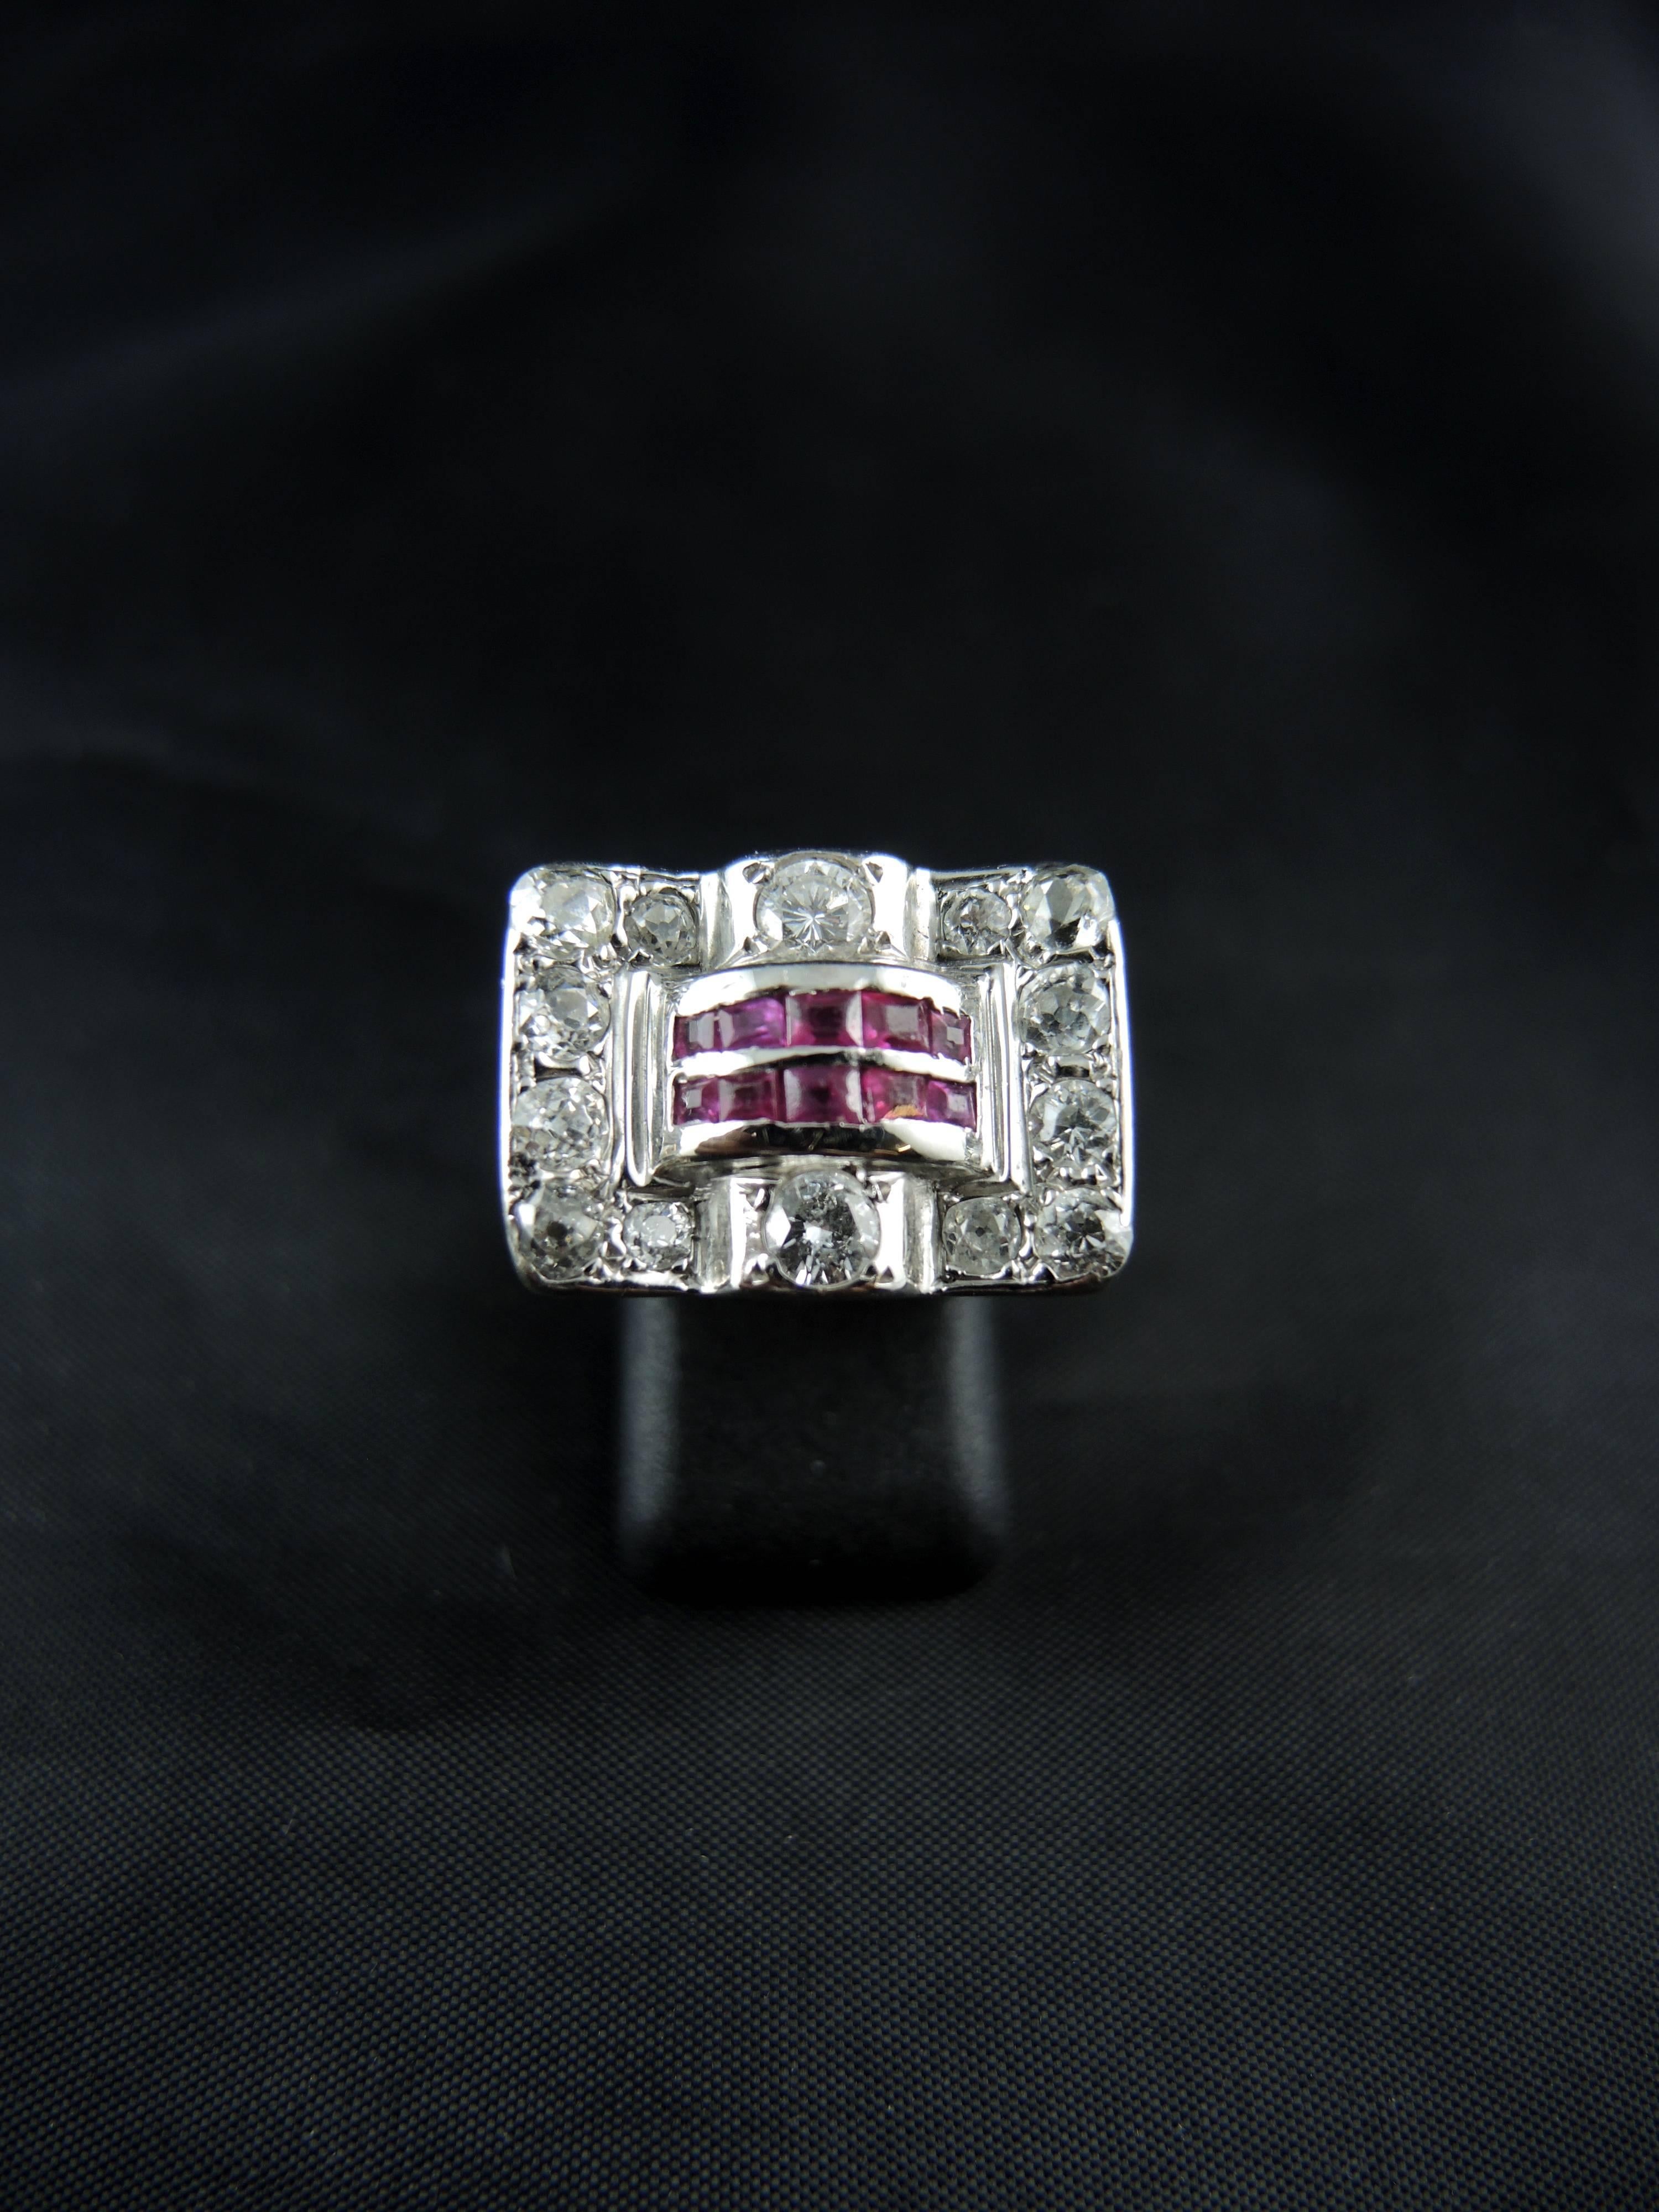 Expetional 18kt white gold Tank ring (quality mark: head of eagle) set with a mix of modern brillant cut and old cut diamonds (total weight estimated around 2,00 Cts), and synthetic rubies.

French work from the 40ies.

Weight: 11,60 g
Ring size: 48